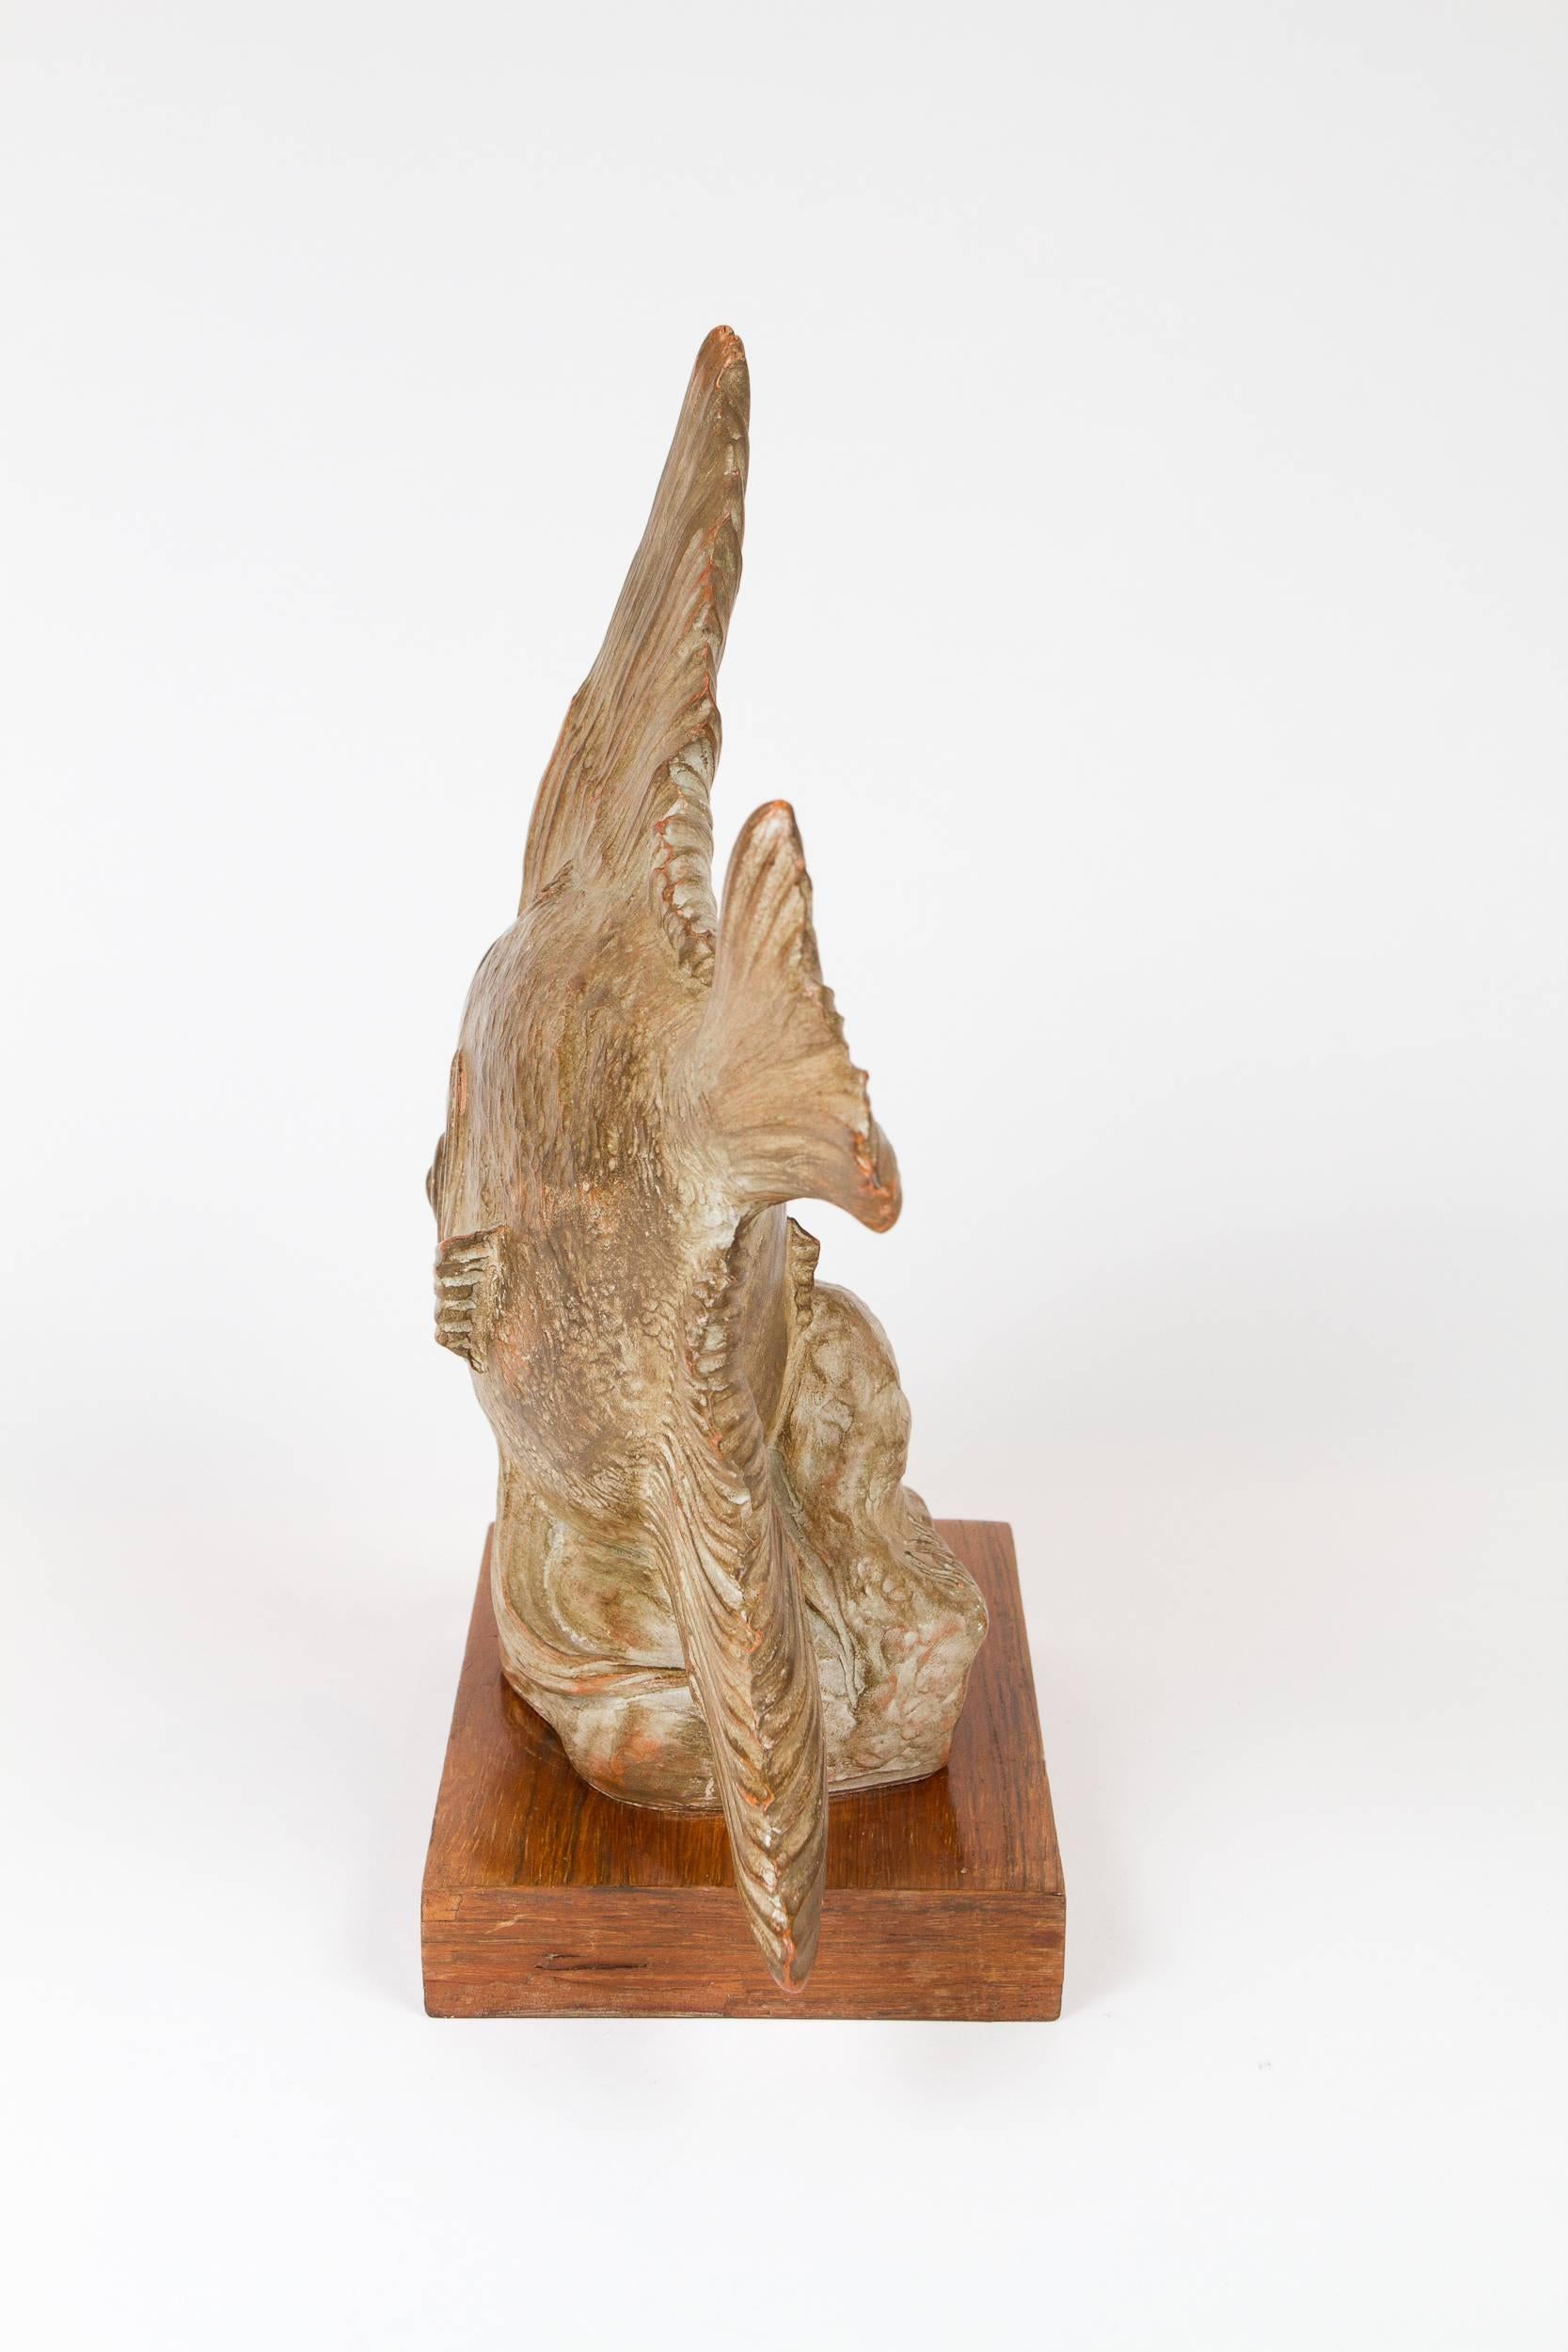 Terracotta Art Deco Figurine of a Fish by R. Rodes In Good Condition For Sale In Montreal, QC